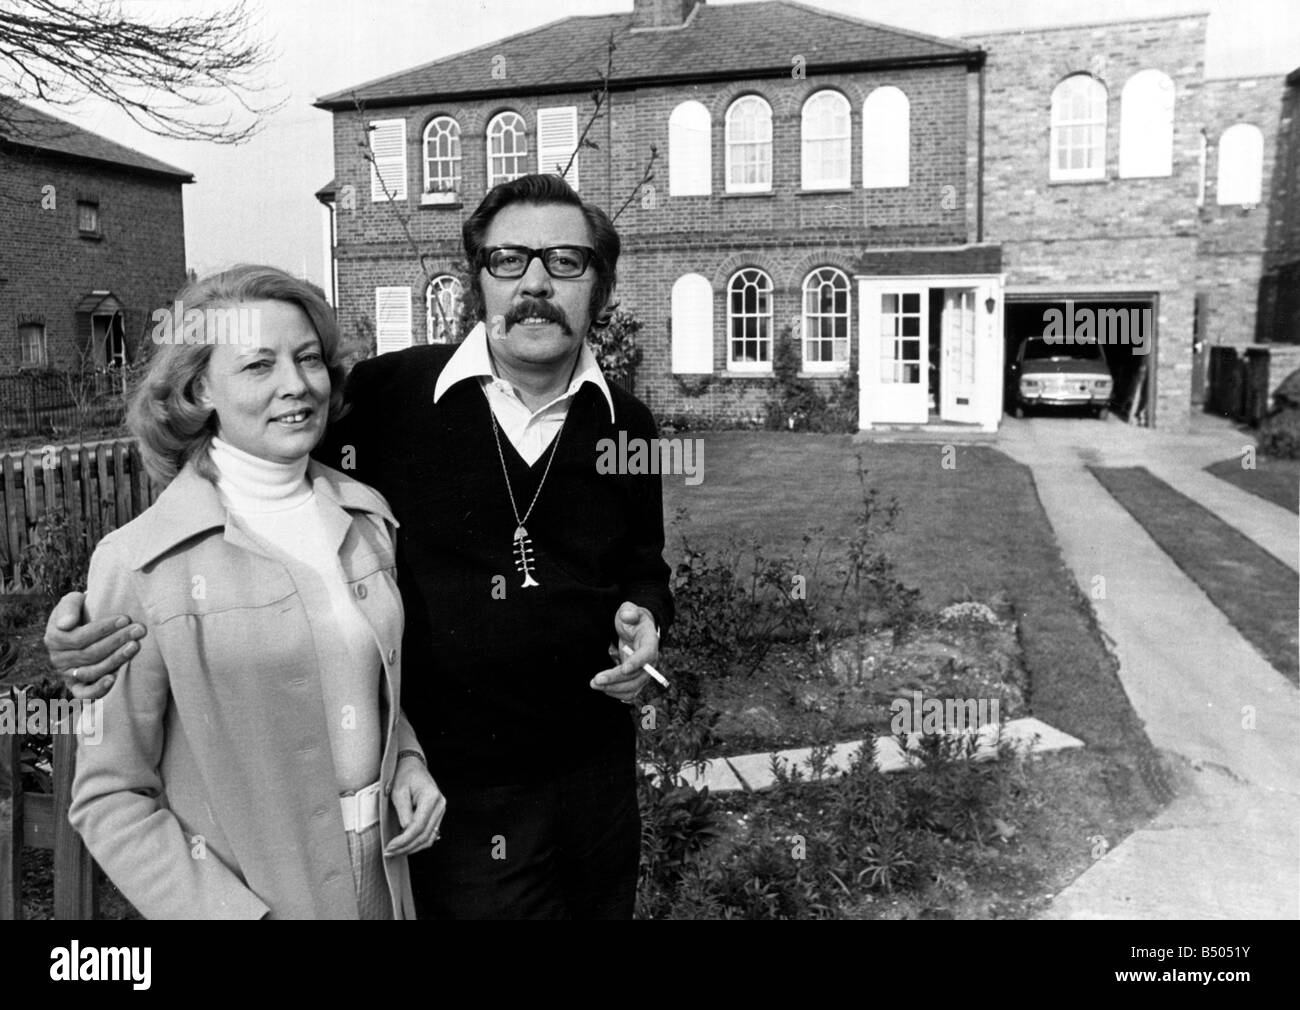 Actor James Beck of Dads Army fame seen here with his wife outside their 120 year old cottage ;©Revielle;2/5/1973; Stock Photo